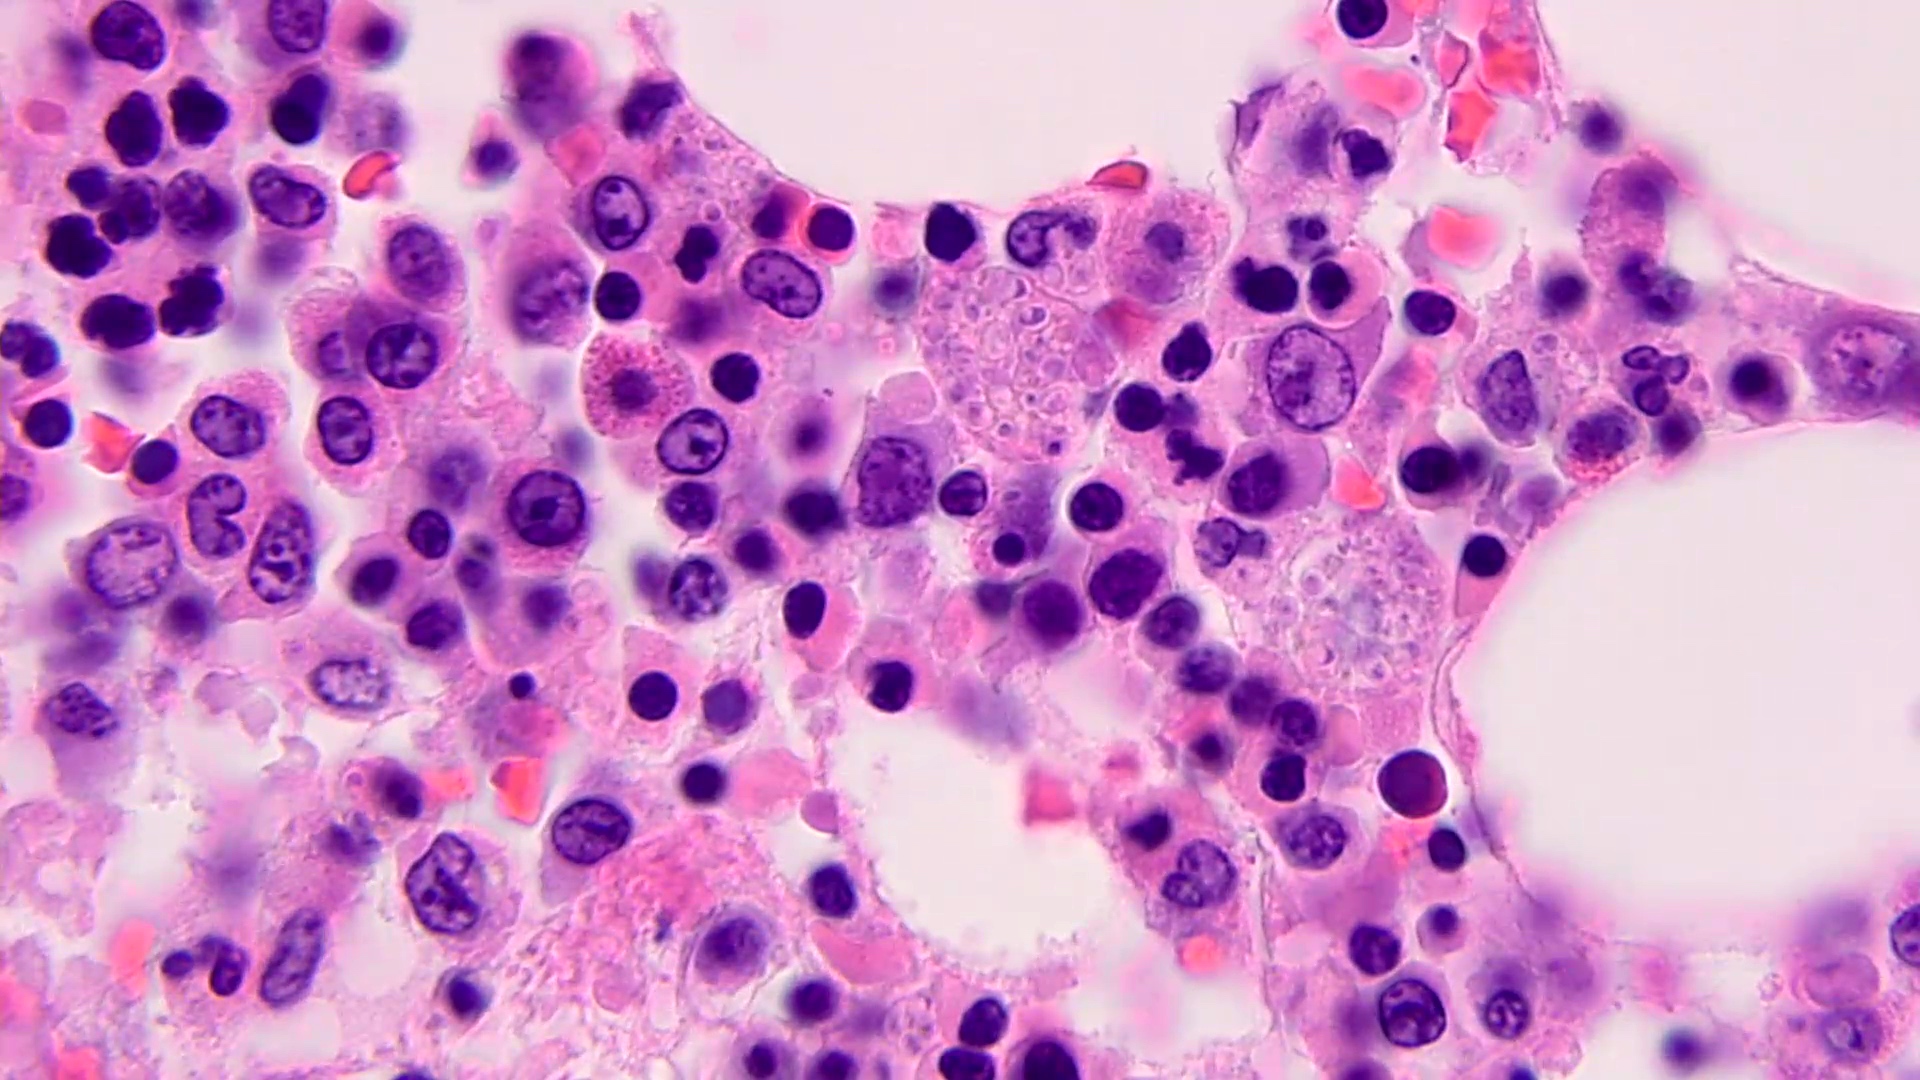 Bone marrow with clustered yeasts